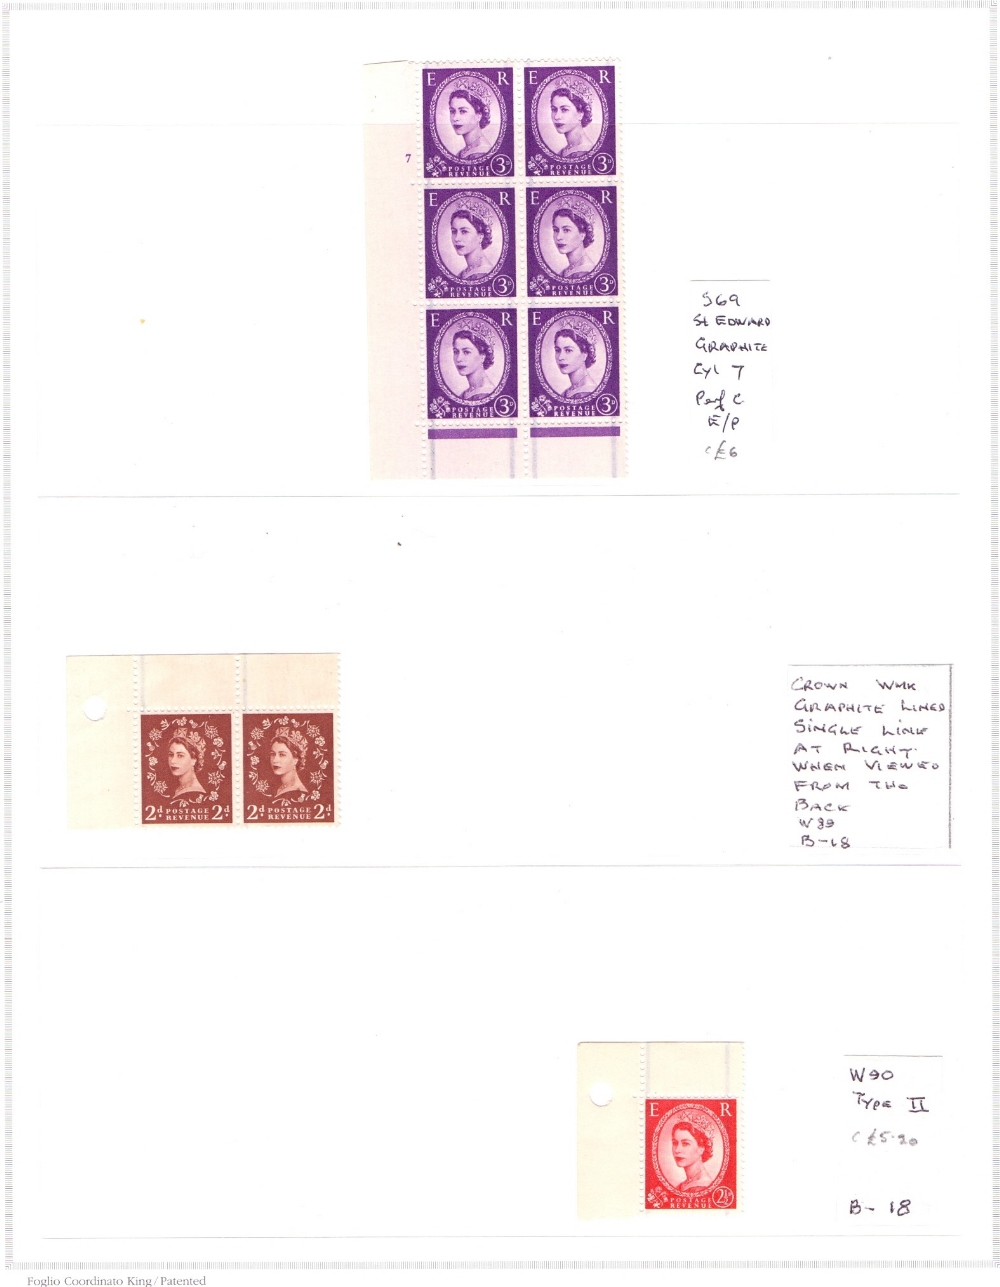 GREAT BRITAIN STAMPS : Wilding Collection, mint cylinder blocks, coils, singles, - Image 8 of 18